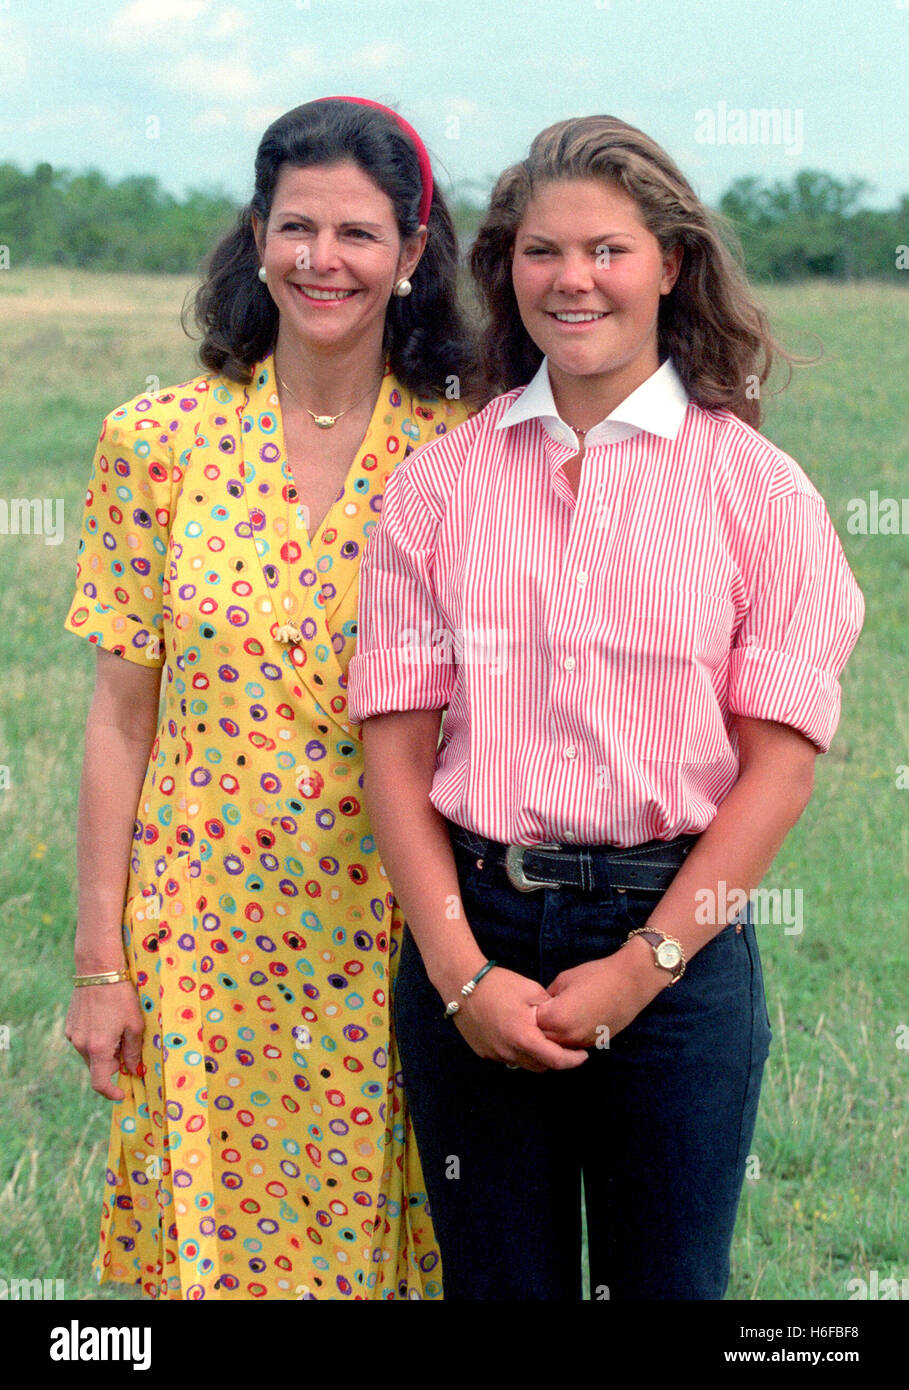 queen-silvia-and-crown-princess-victoria-at-summer-vacation-to-land-H6FBF8.jpg